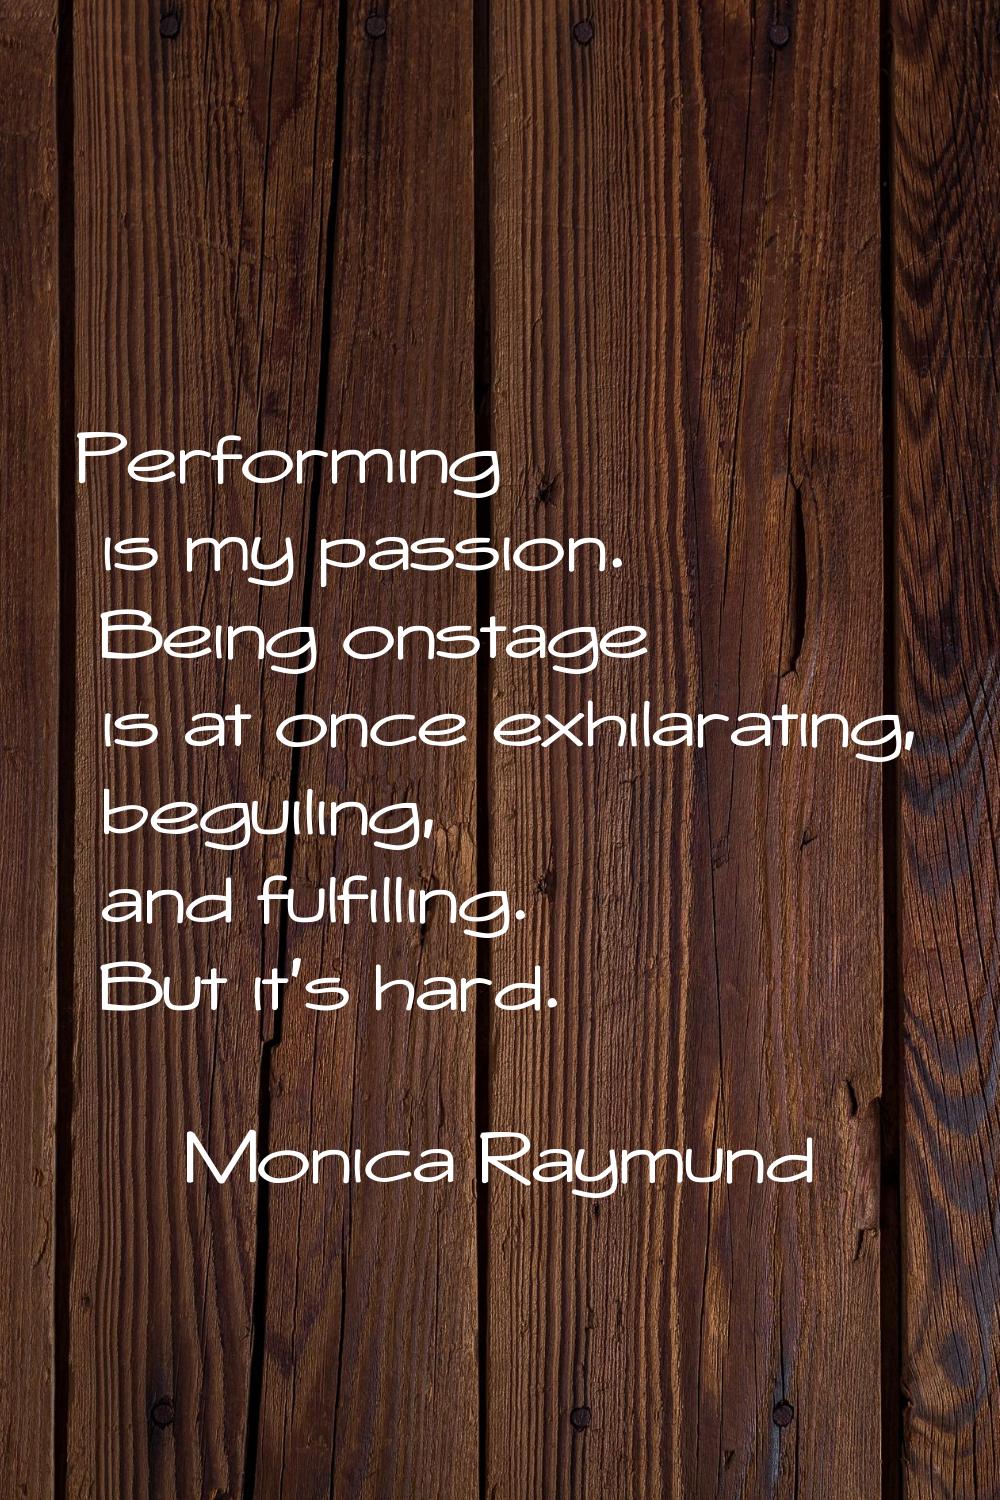 Performing is my passion. Being onstage is at once exhilarating, beguiling, and fulfilling. But it'